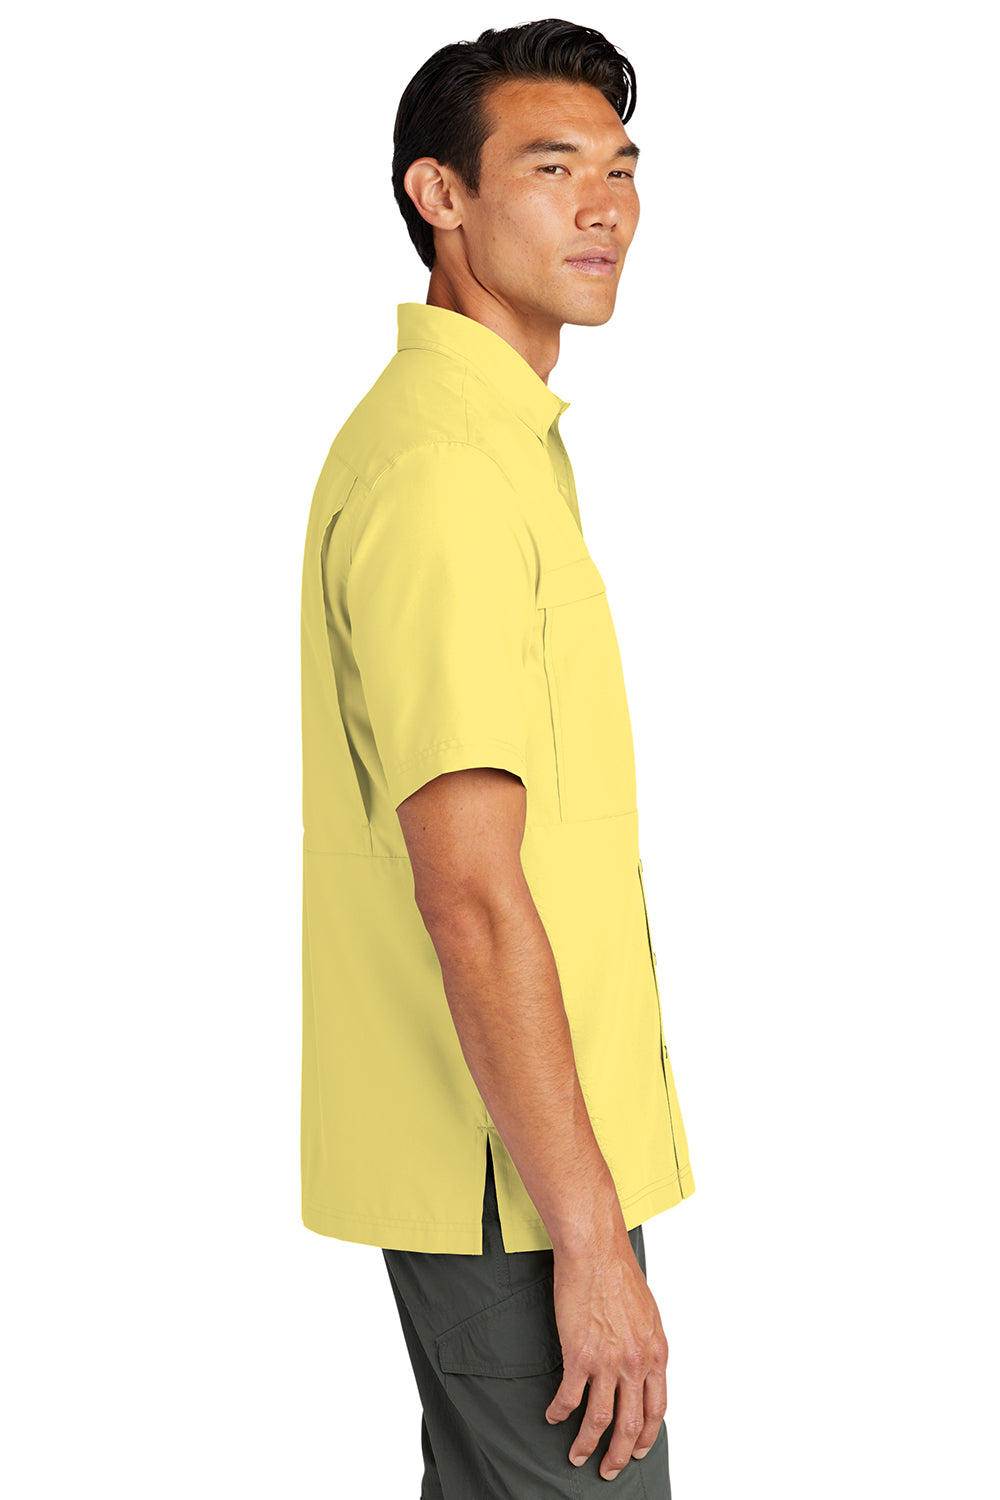 Port Authority W961 Mens Daybreak Moisture Wicking Short Sleeve Button Down Shirt w/ Double Pockets Yellow SIde